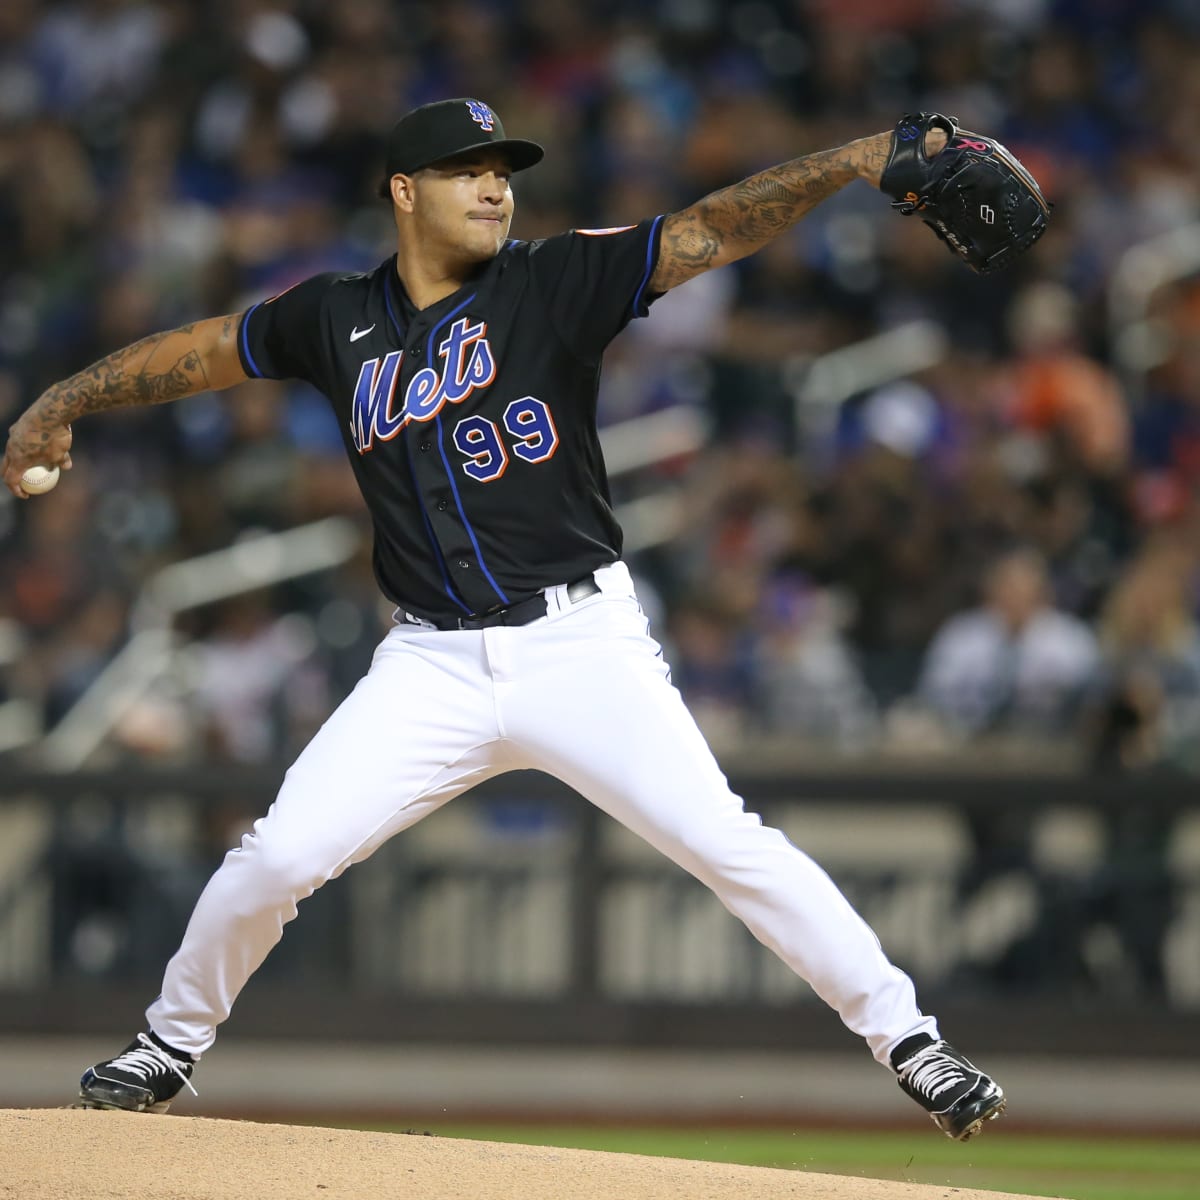 Taijuan Walker Not Happy About Being Pulled Early; Mets Fall Short